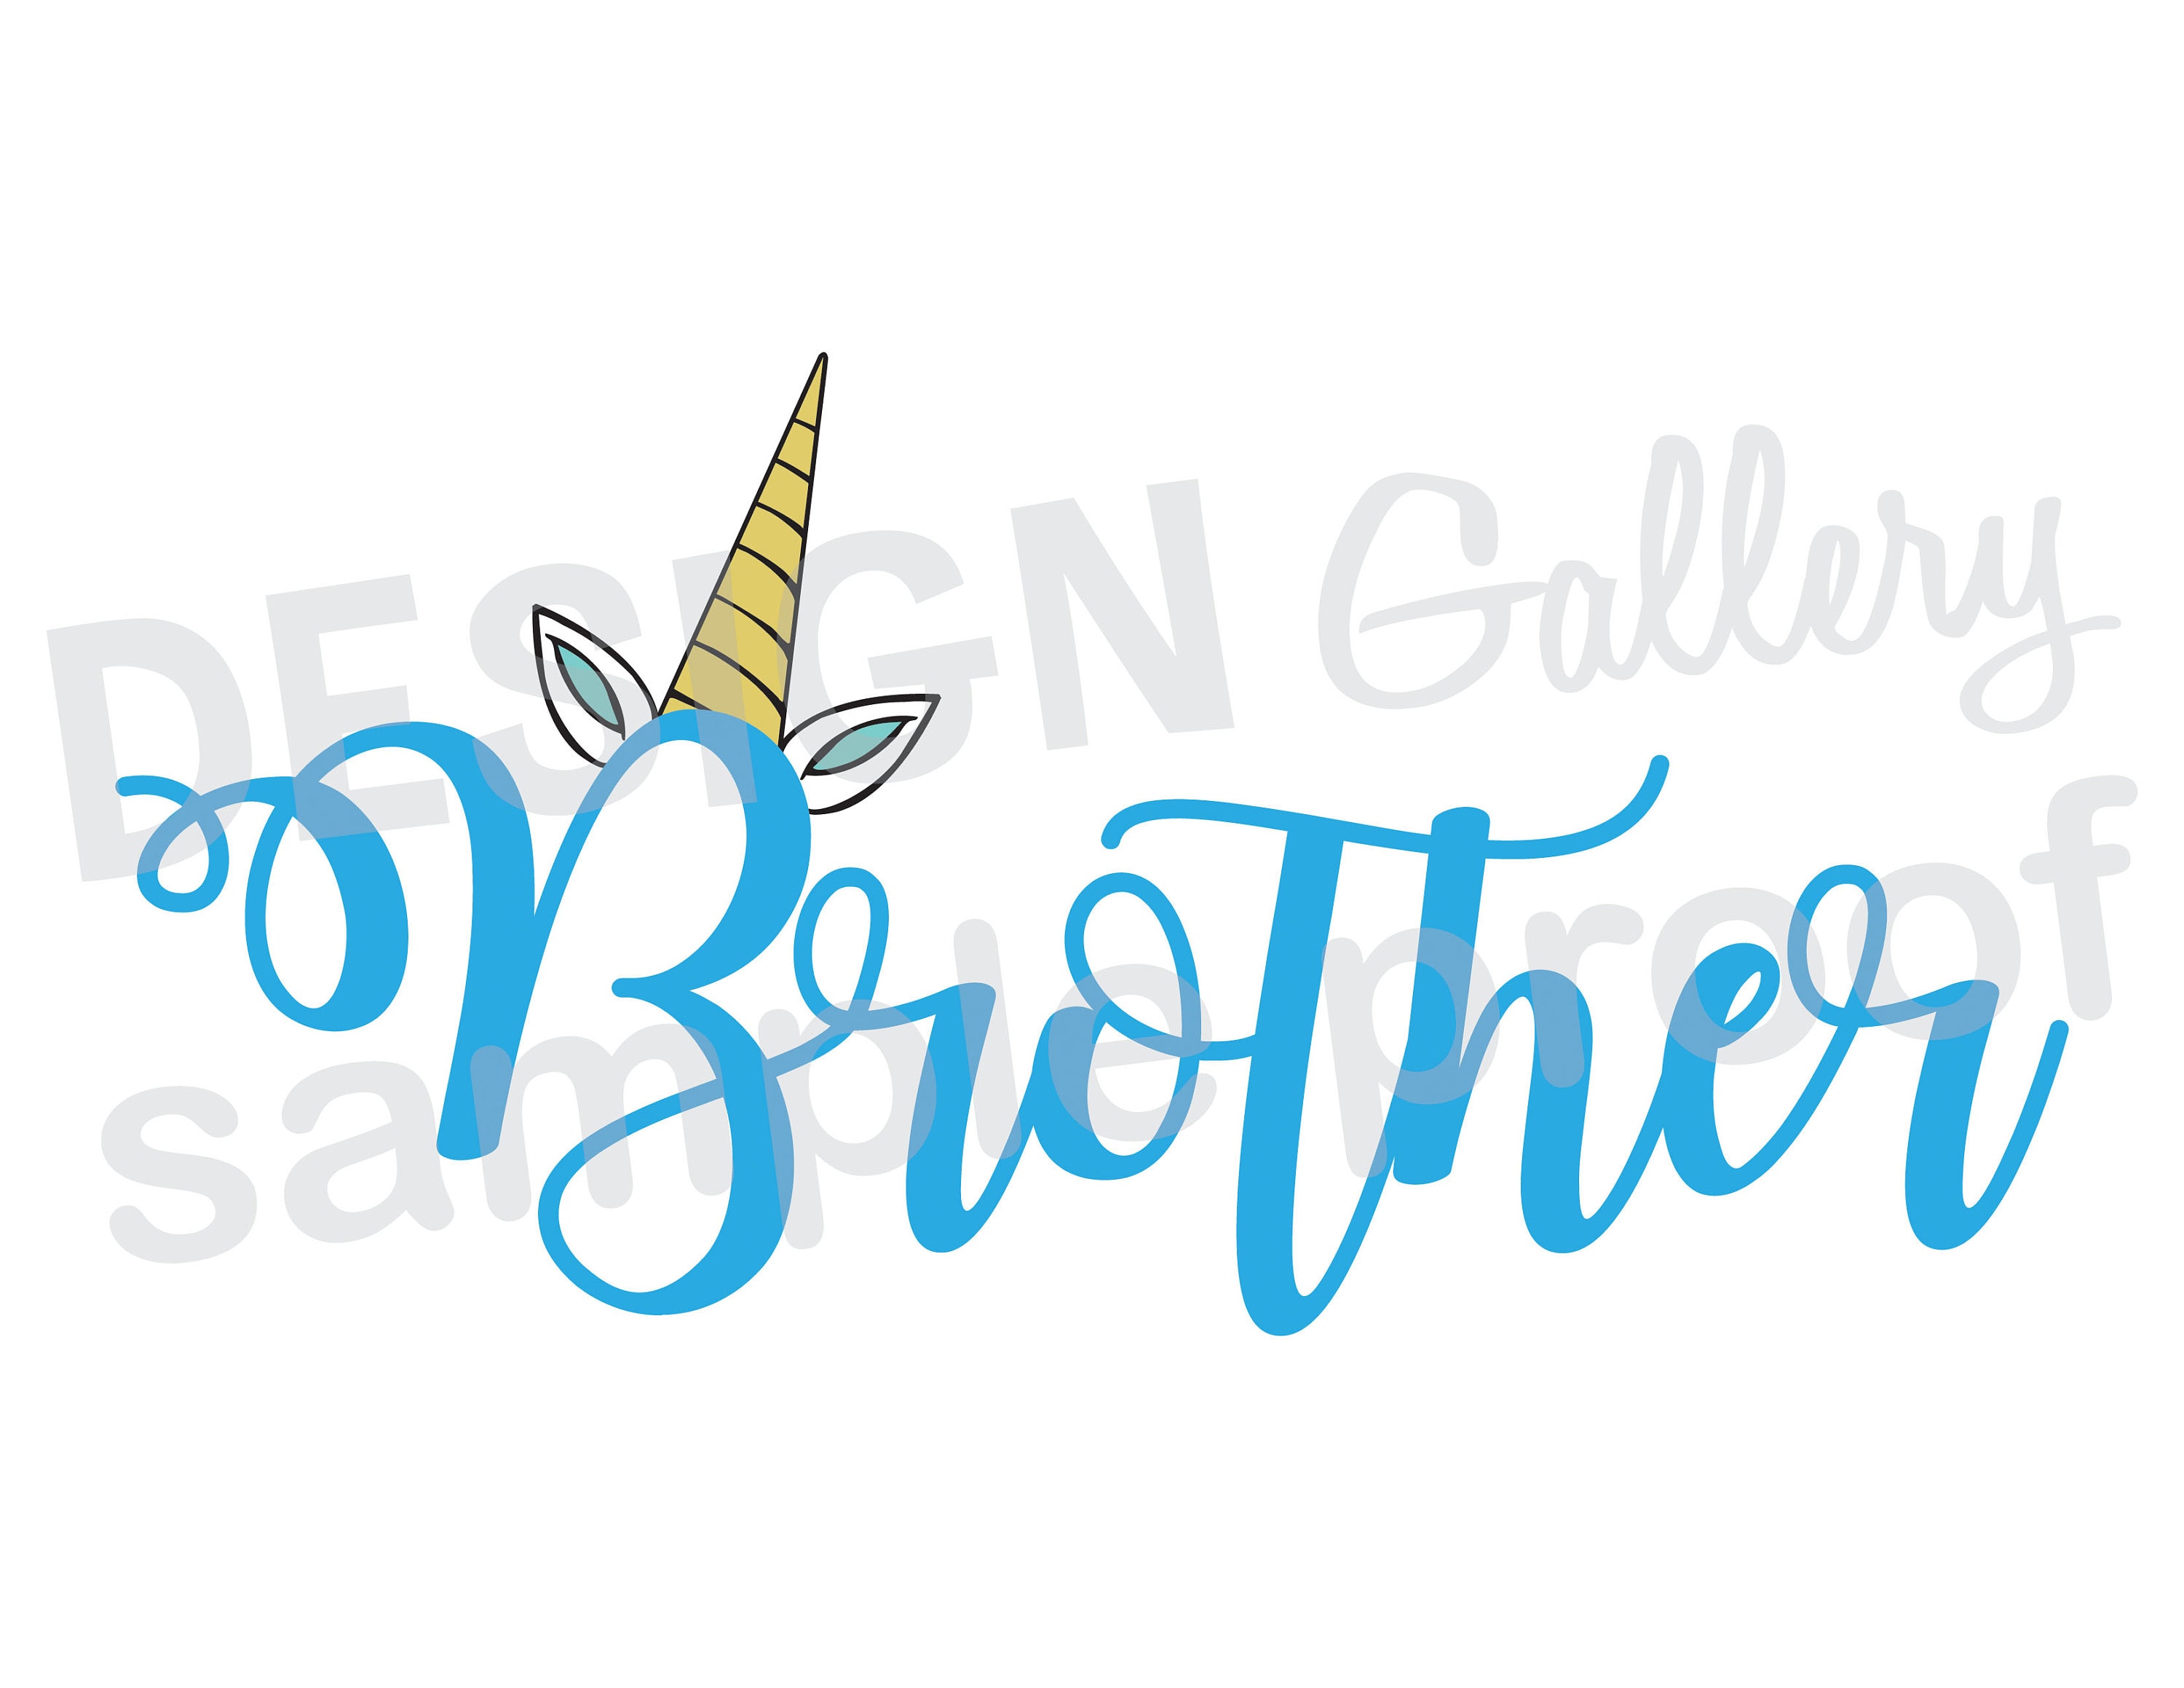 Download Brother Unicorn JPG png & SVG DXF cut file Printable | Etsy